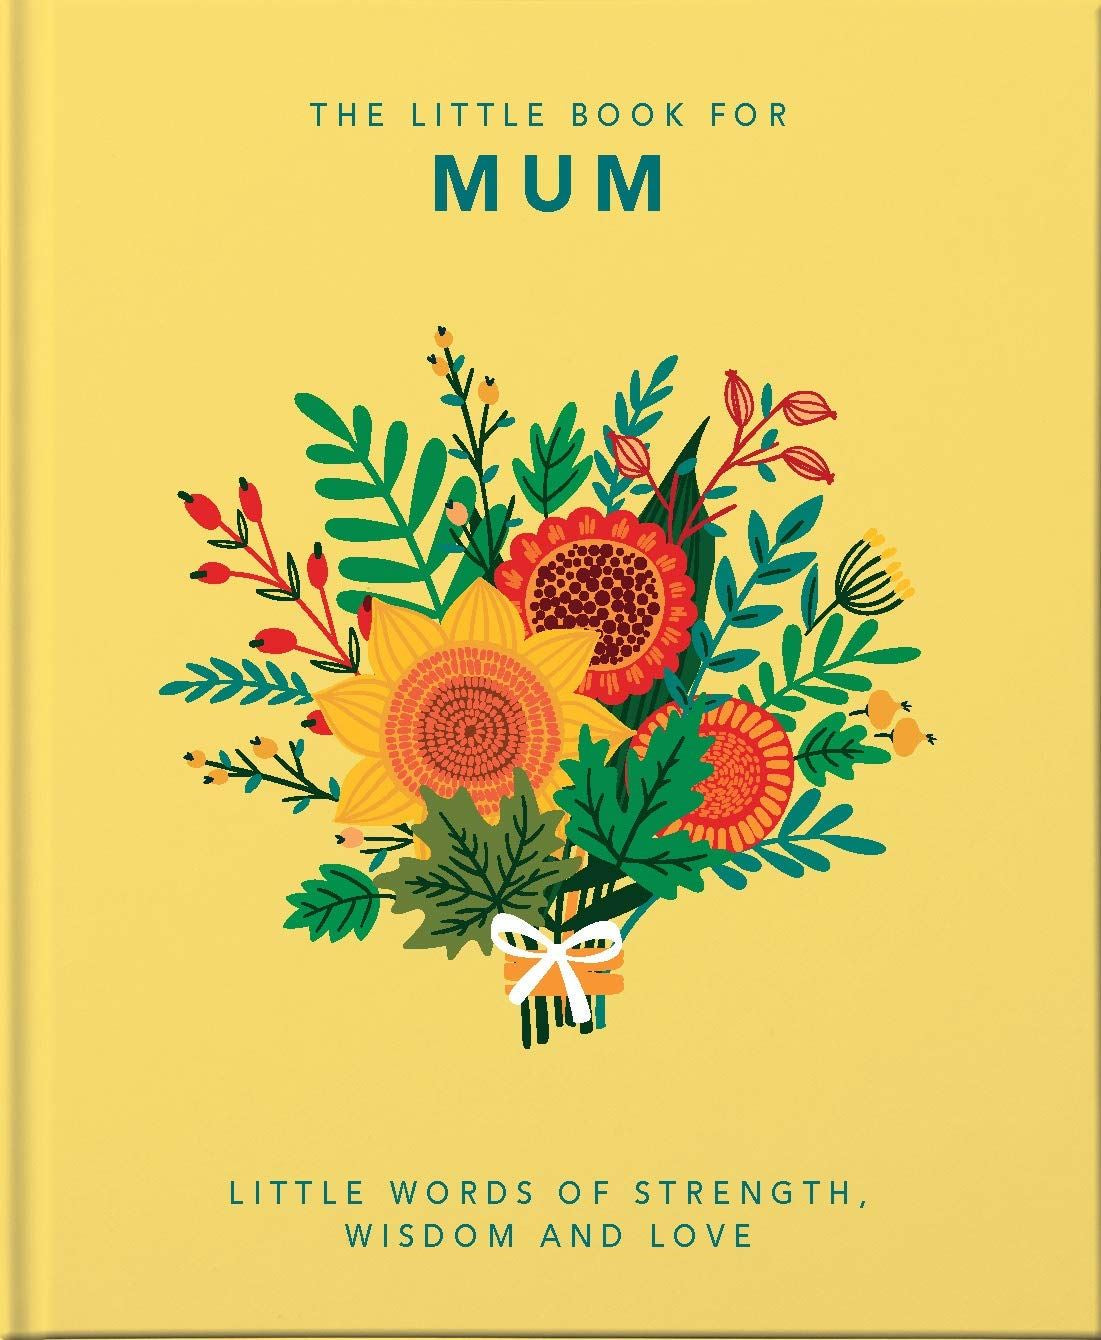 The Little Book For Mum